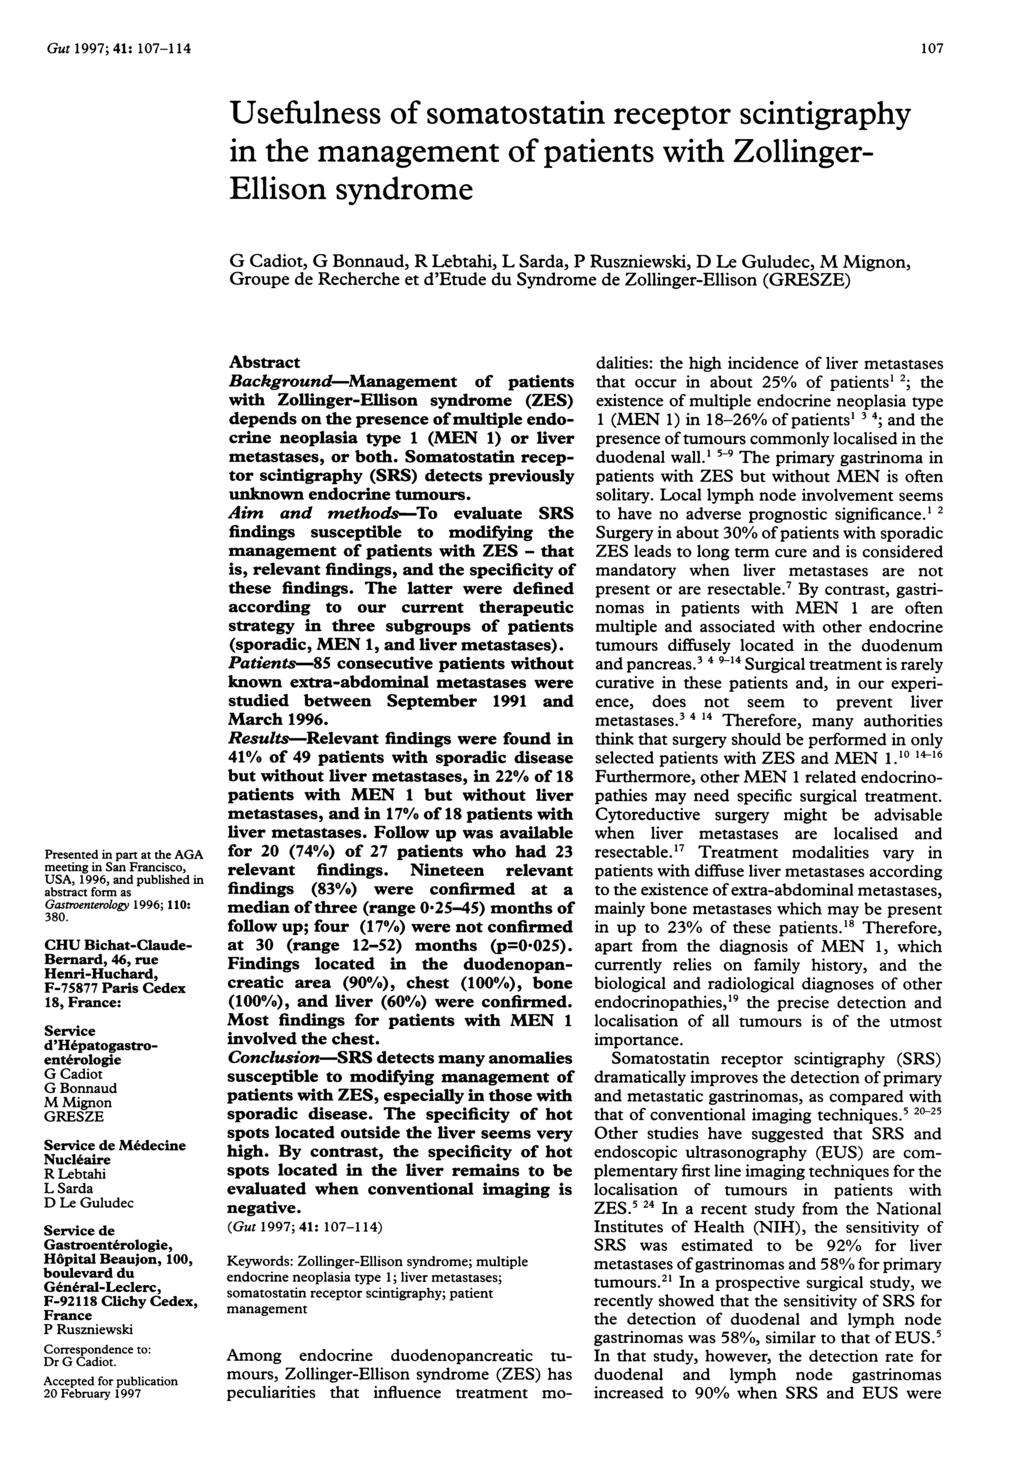 Gutl997;41: 107-114 Presented in part at the AGA meeting in San Francisco, USA, 1996, and published in abstract form as Gastroenterology 1996; 110: 380.